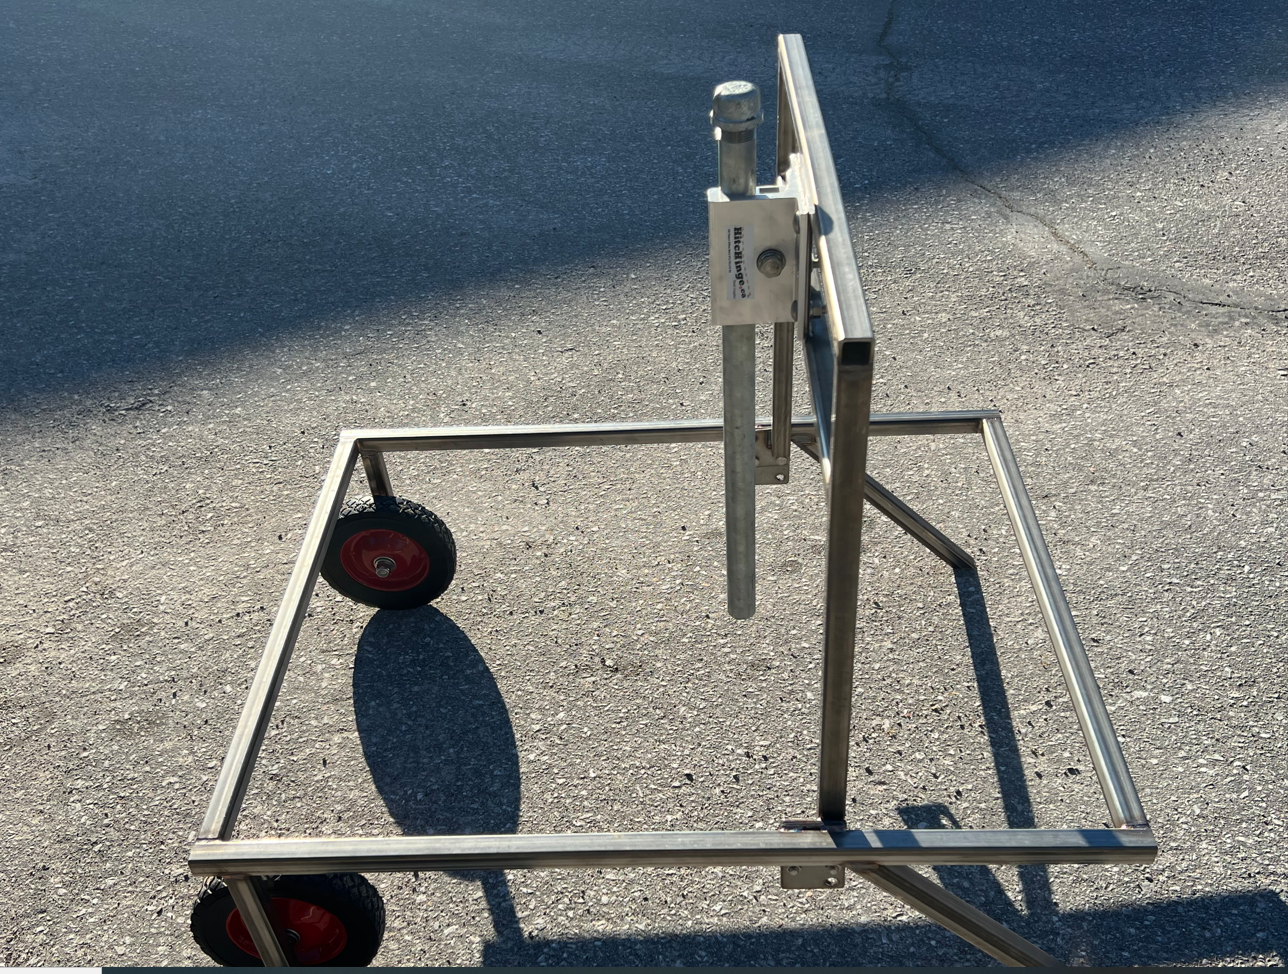 Blower/ Thruster Stainless Steel Universal Moveable stand